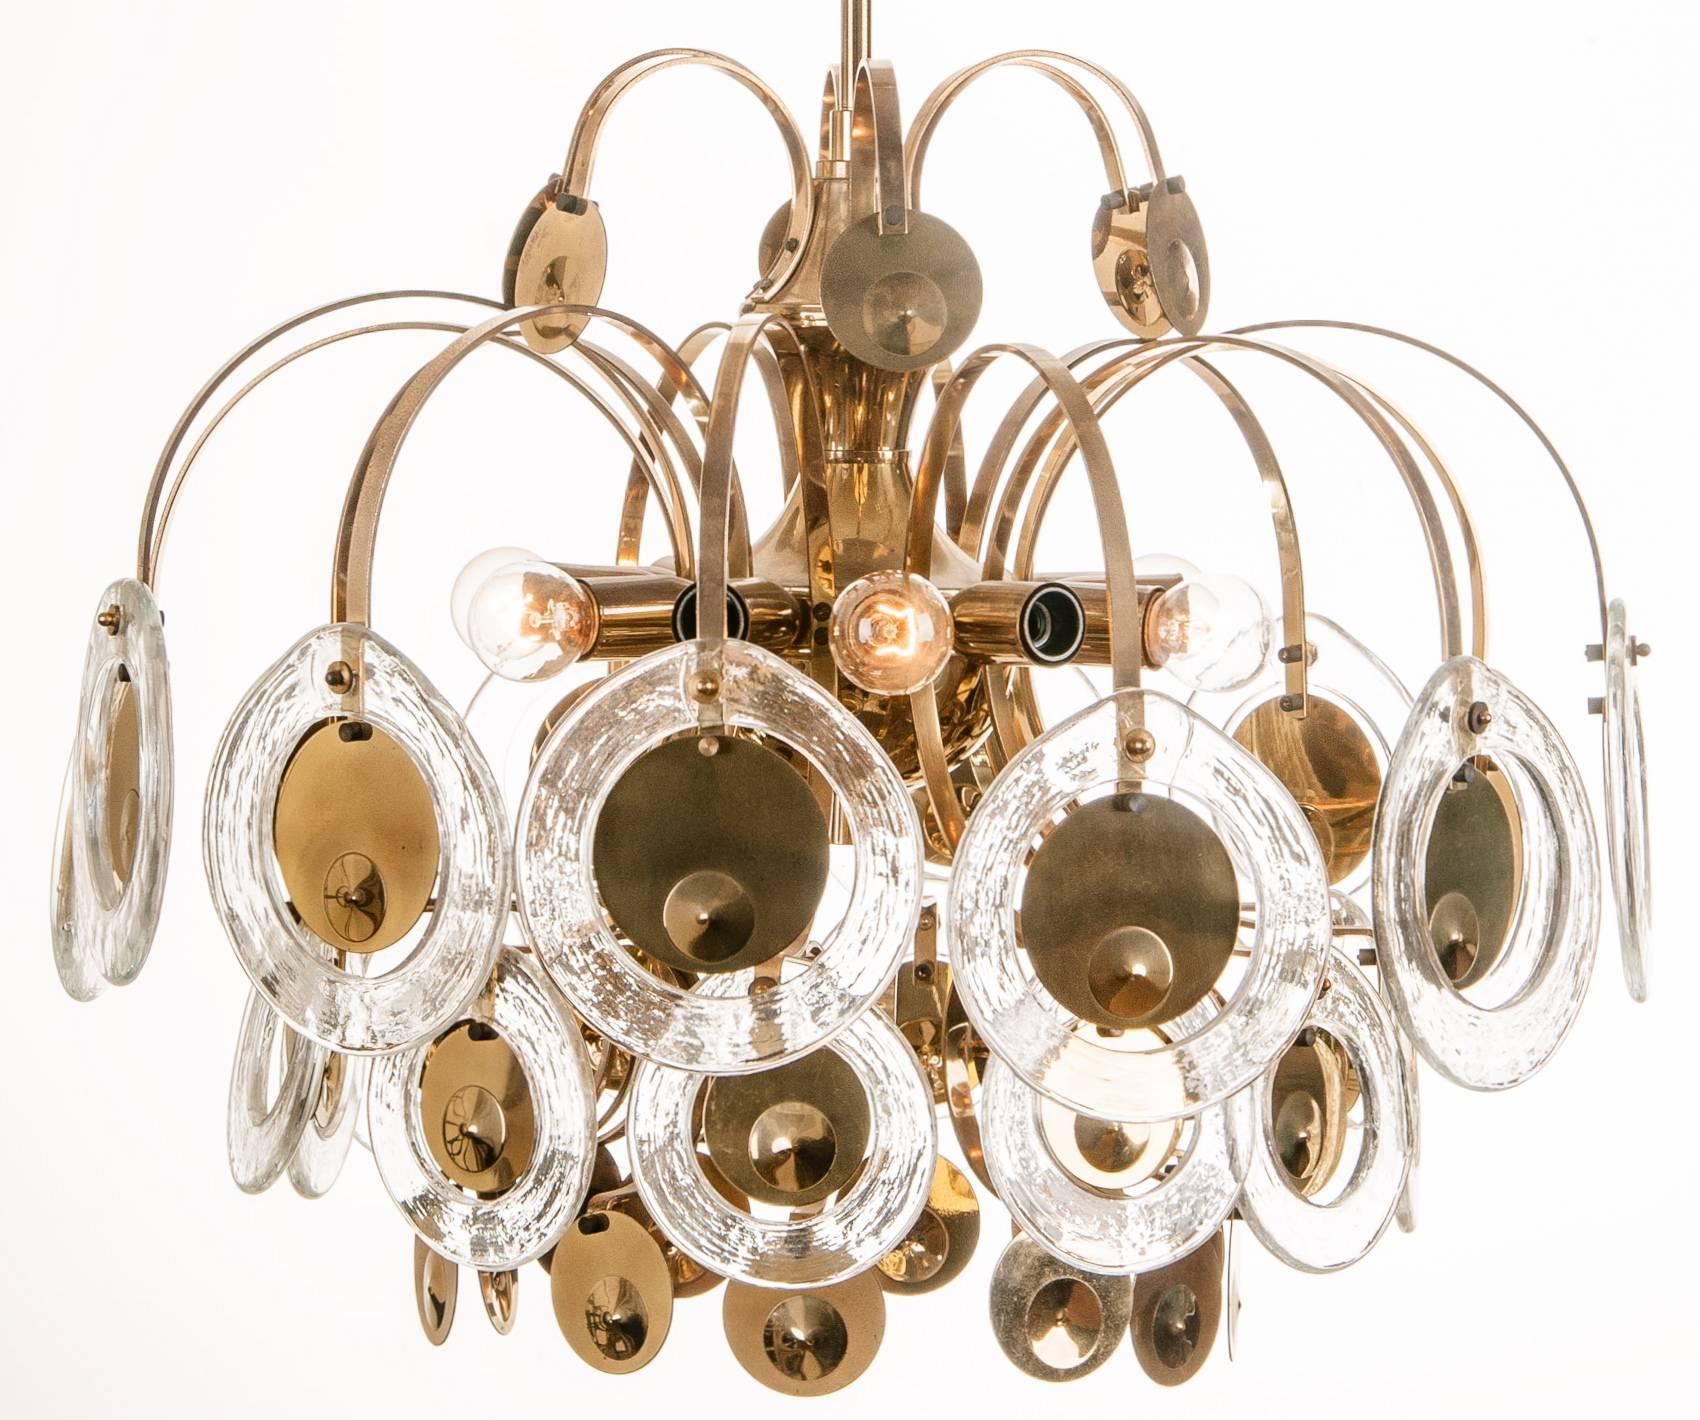 Rare chandelier by Gaetano Sciolari. It is made by dozens of blown glass rings that surround the brass circles. Amazing lighting effects.
Available a pair.